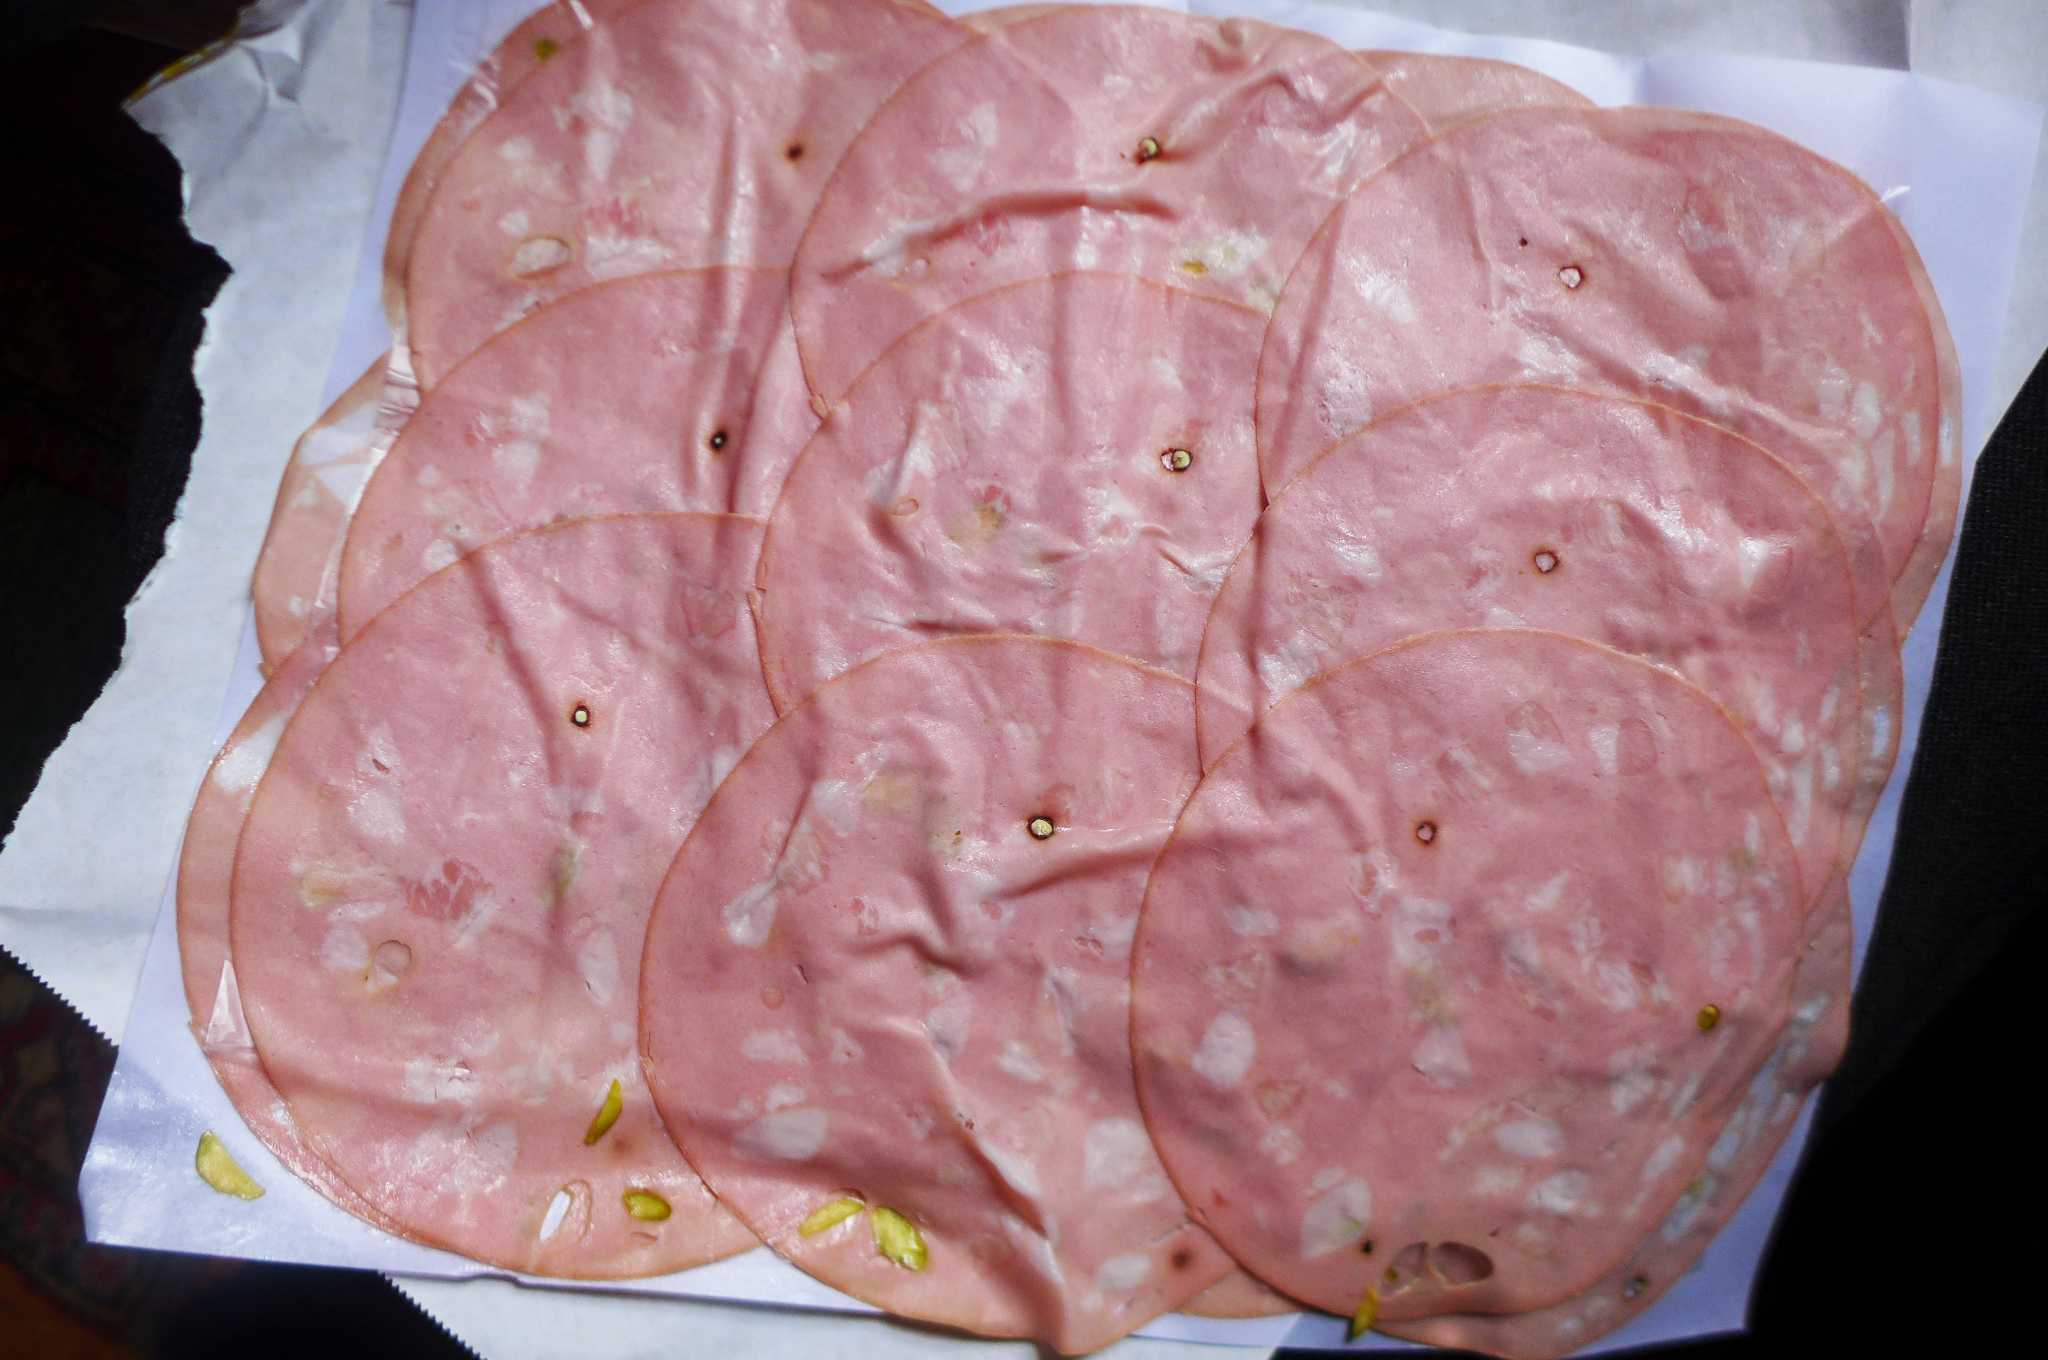 Thin overlapping slices of mortadella on a white butcher paper.